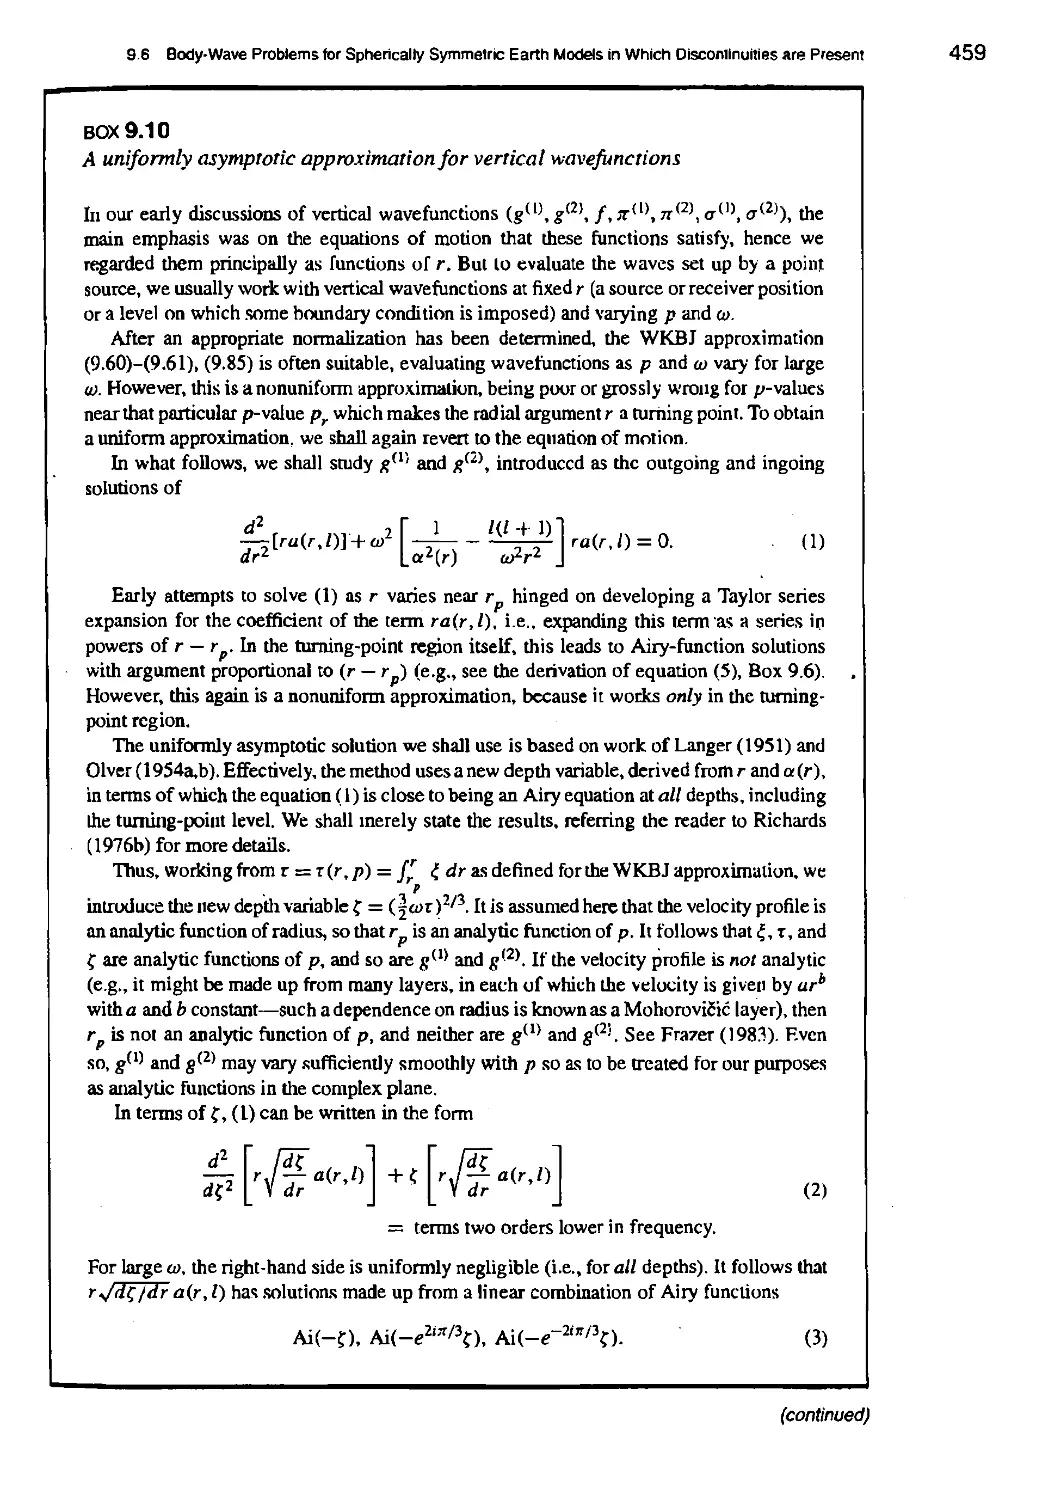 BOX 9.10 A uniformly asymptotic approximation for vertical wavefunctions